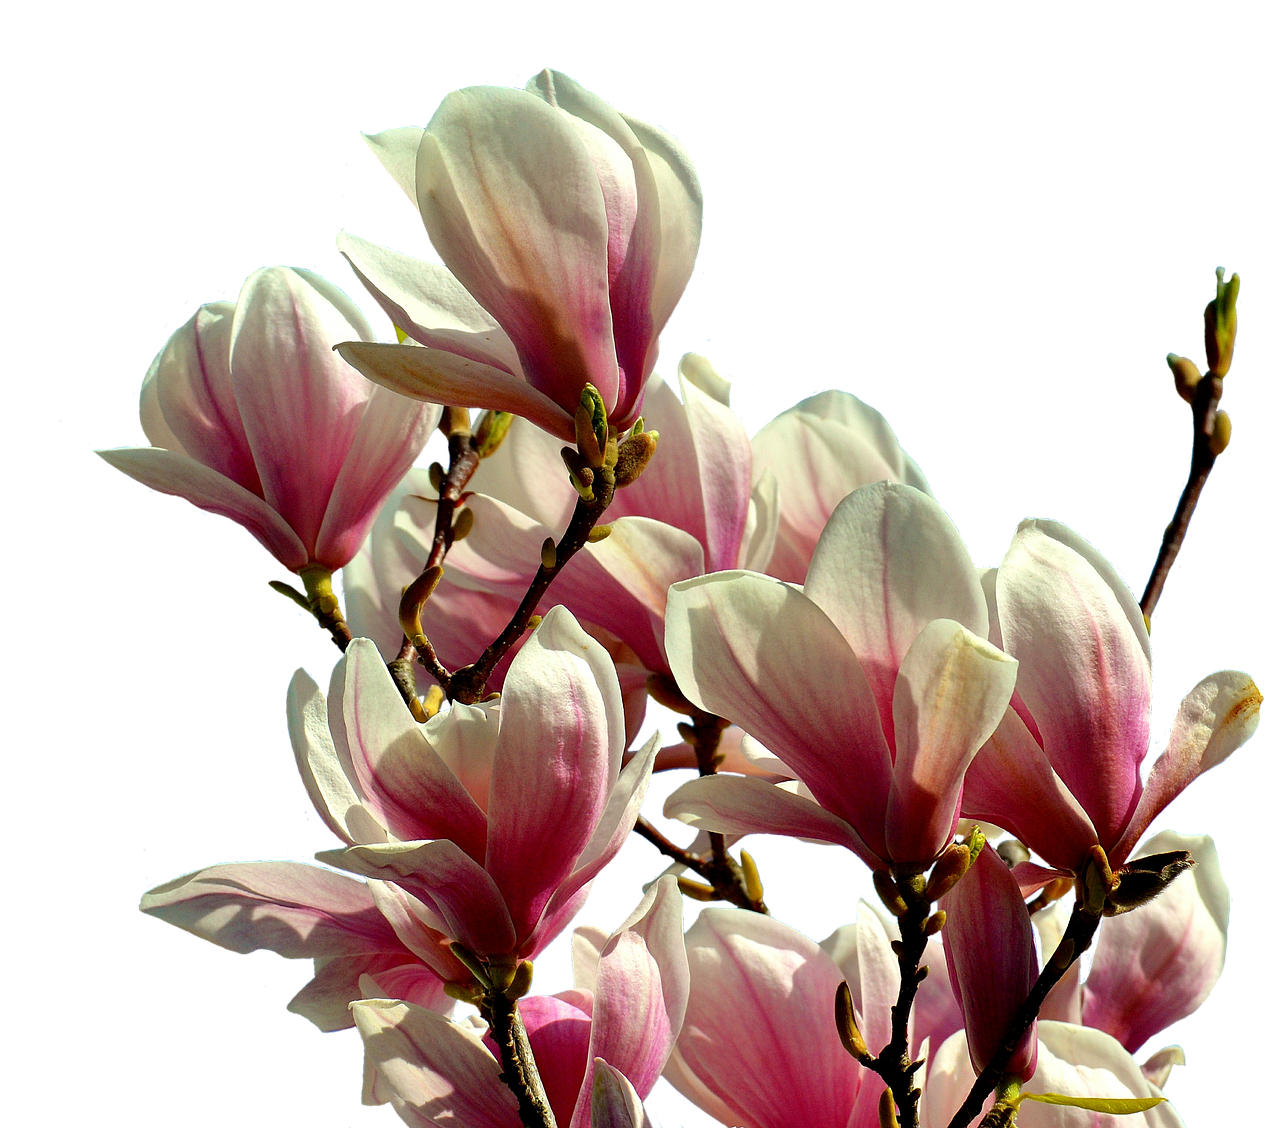 A Group Of Pink And White Flowers